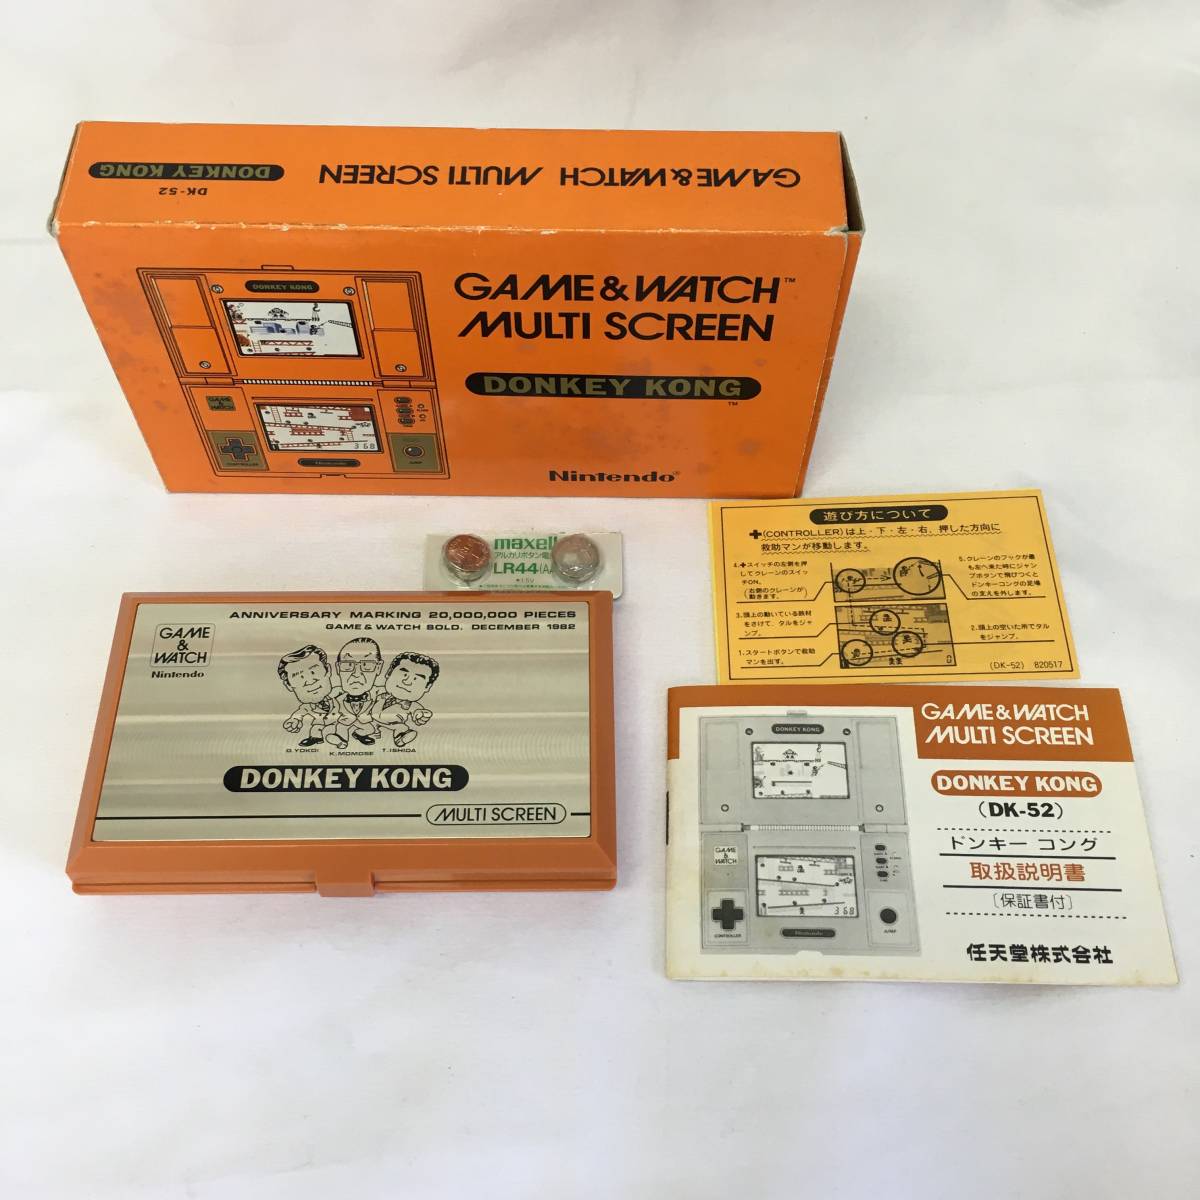 This rare Nintendo Game & Watch just broke an auction record